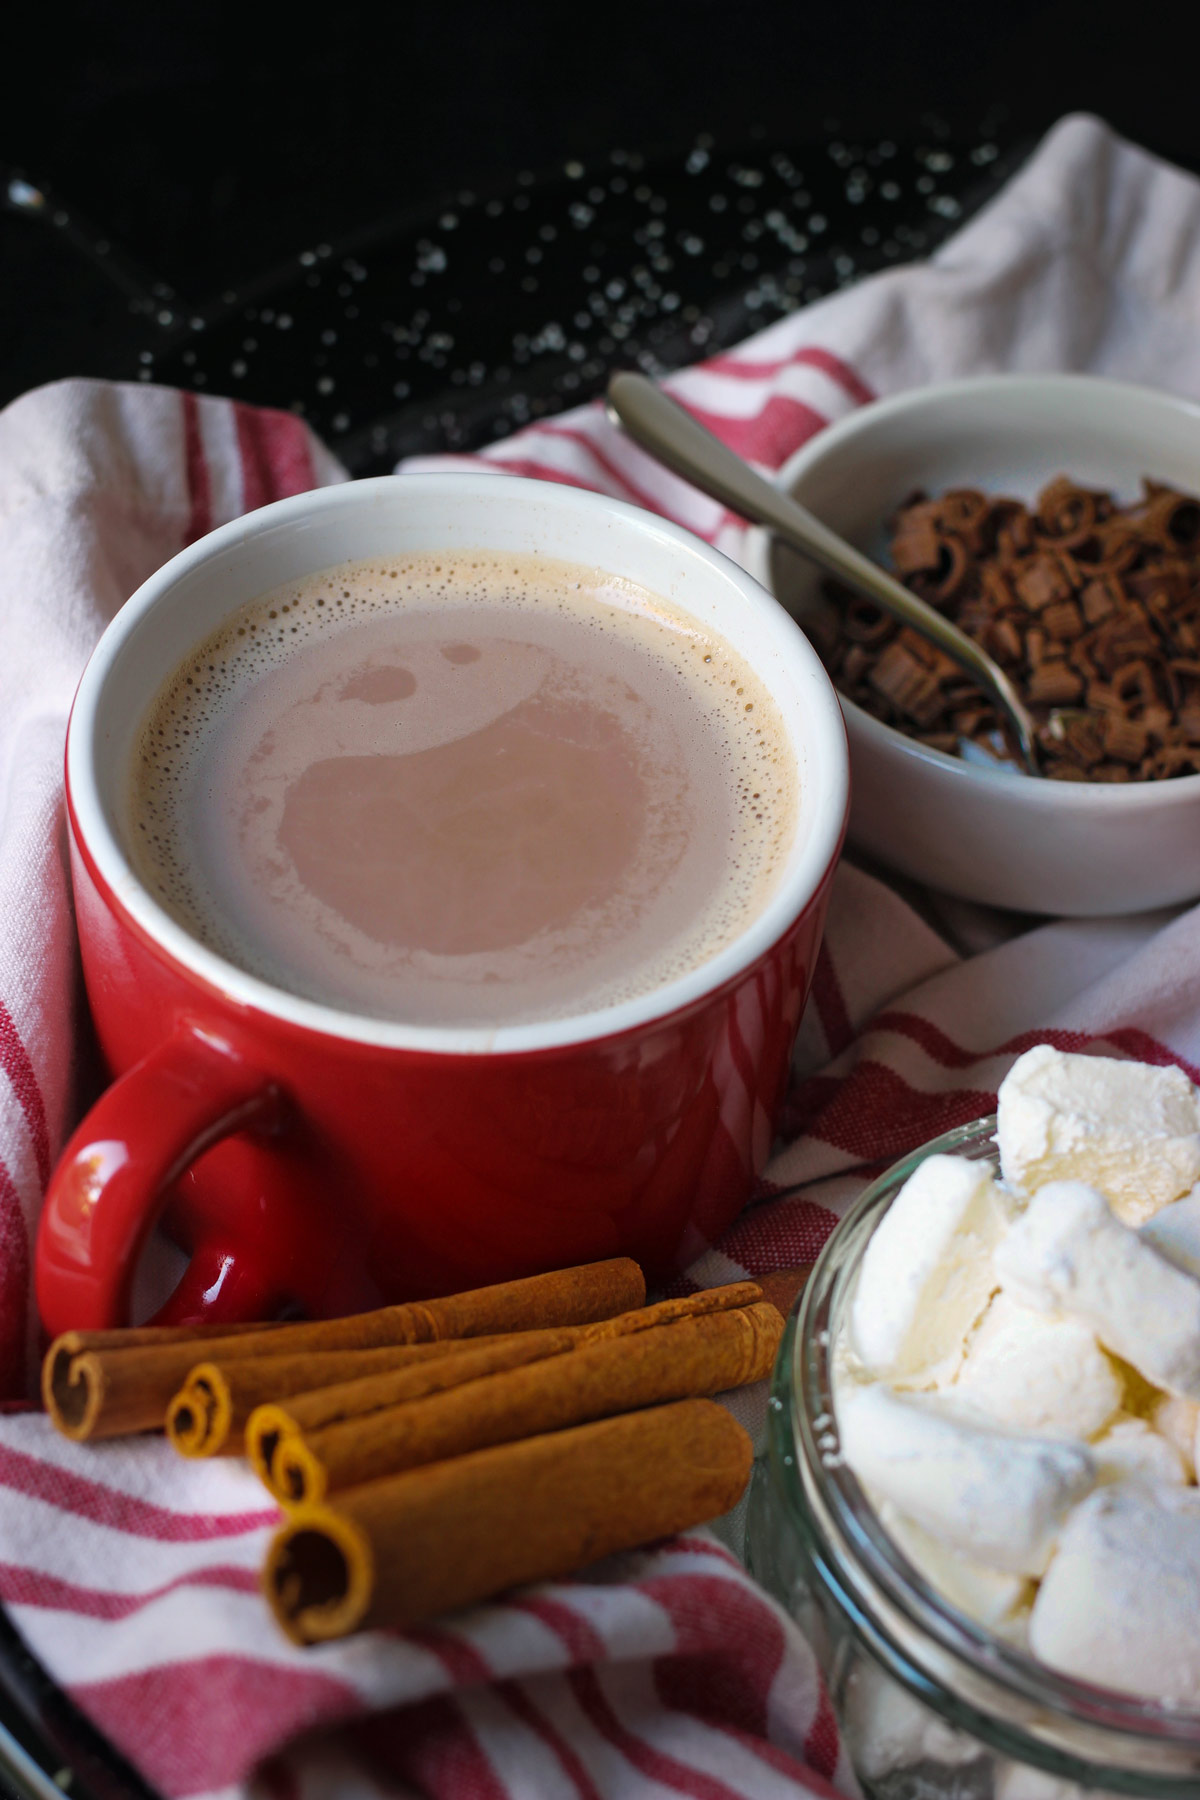 mug of hot cocoa on red striped cloth surrounded by dishes of toppings.